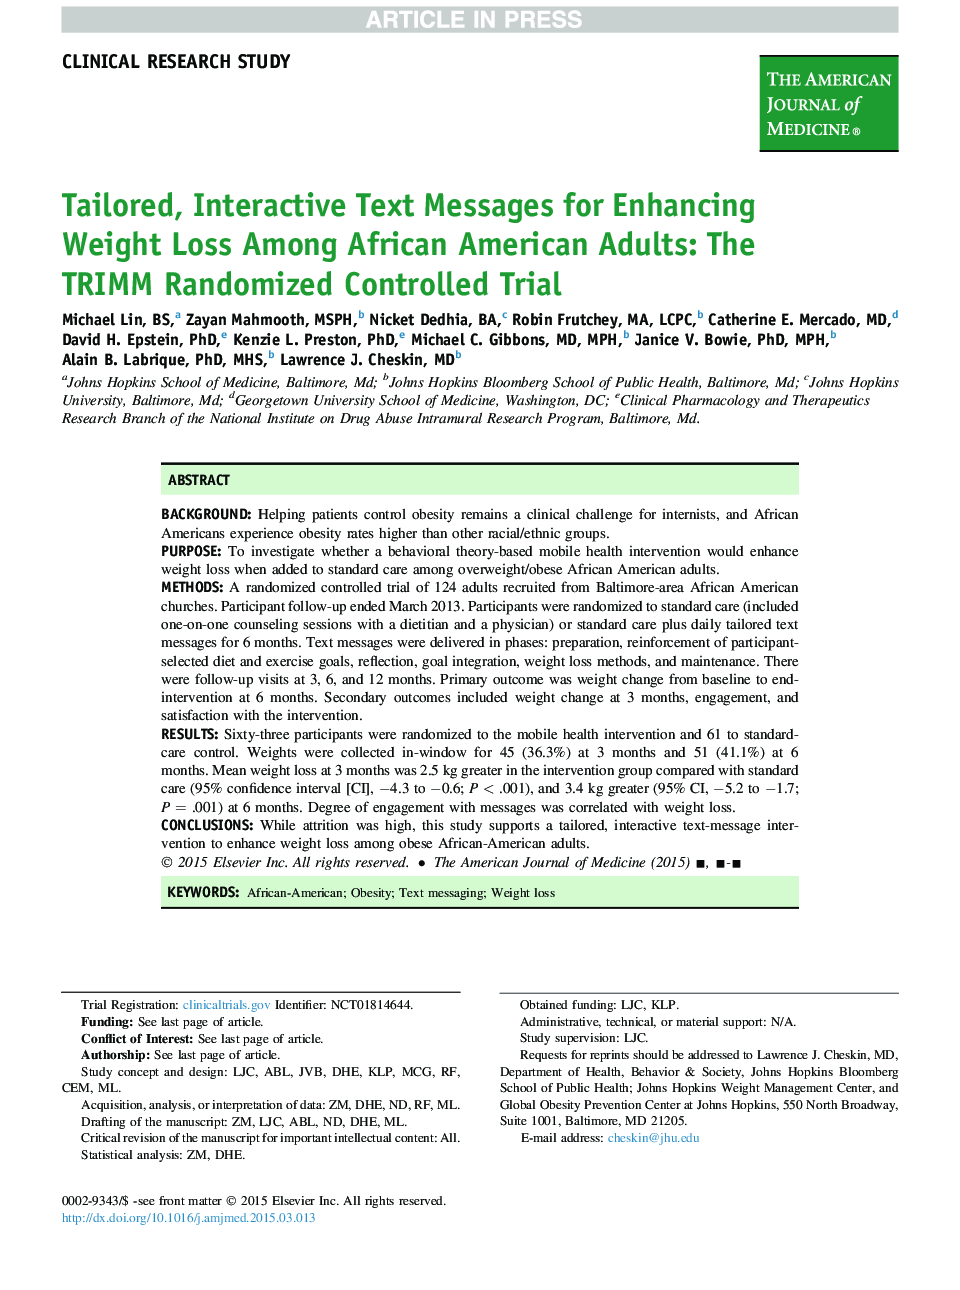 Tailored, Interactive Text Messages for Enhancing Weight Loss Among African American Adults: The TRIMM Randomized Controlled Trial